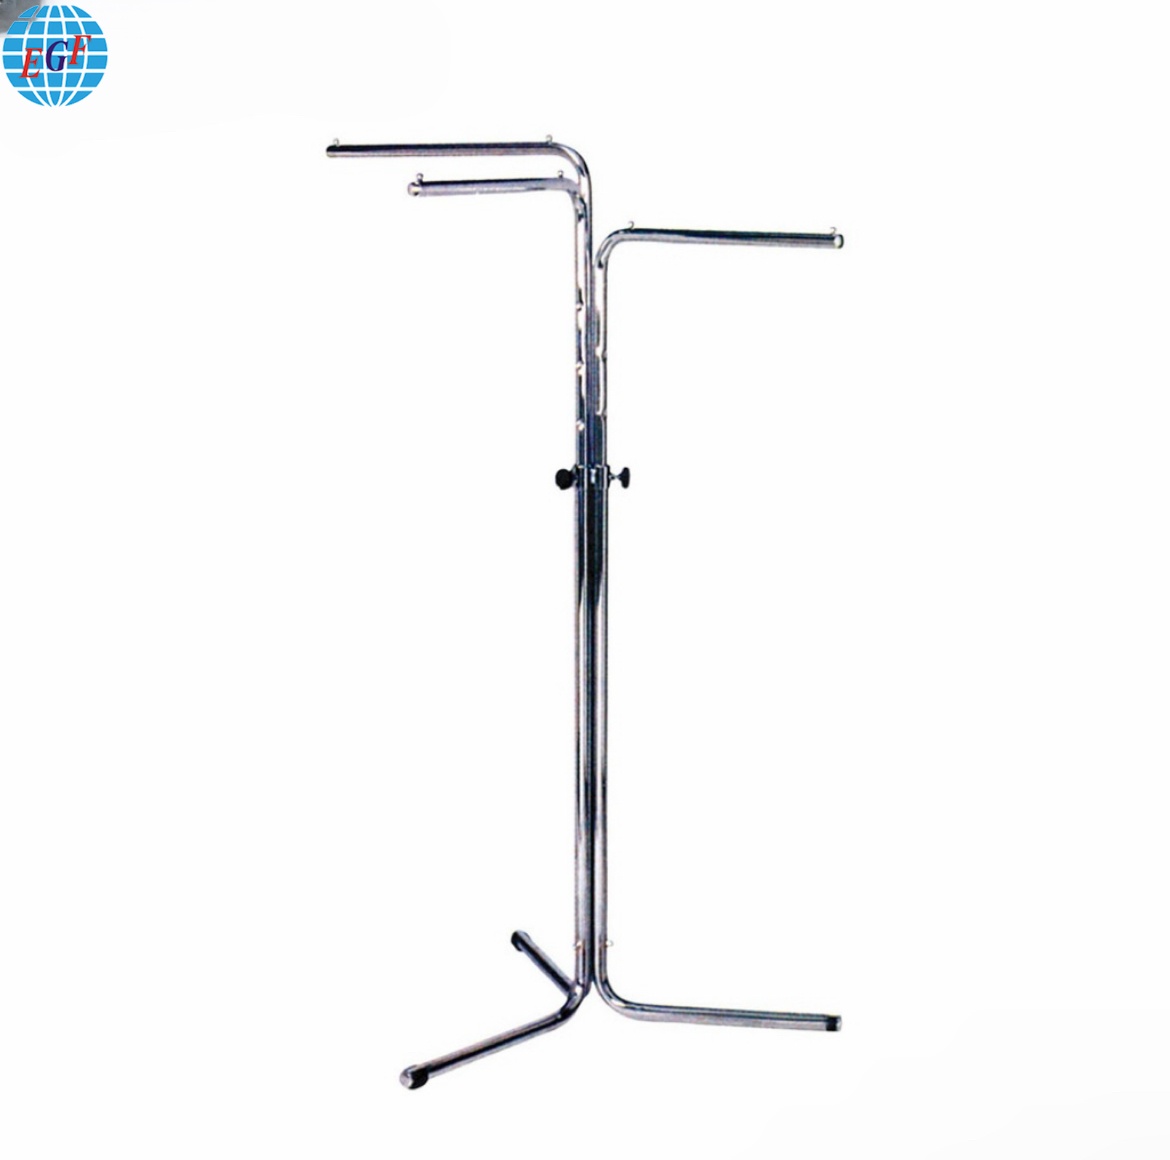 2 Styles Adjustable 3-Way Clothing Rack: Steel, Slant Waterfalls/Straight Arms, Multiple Finishes